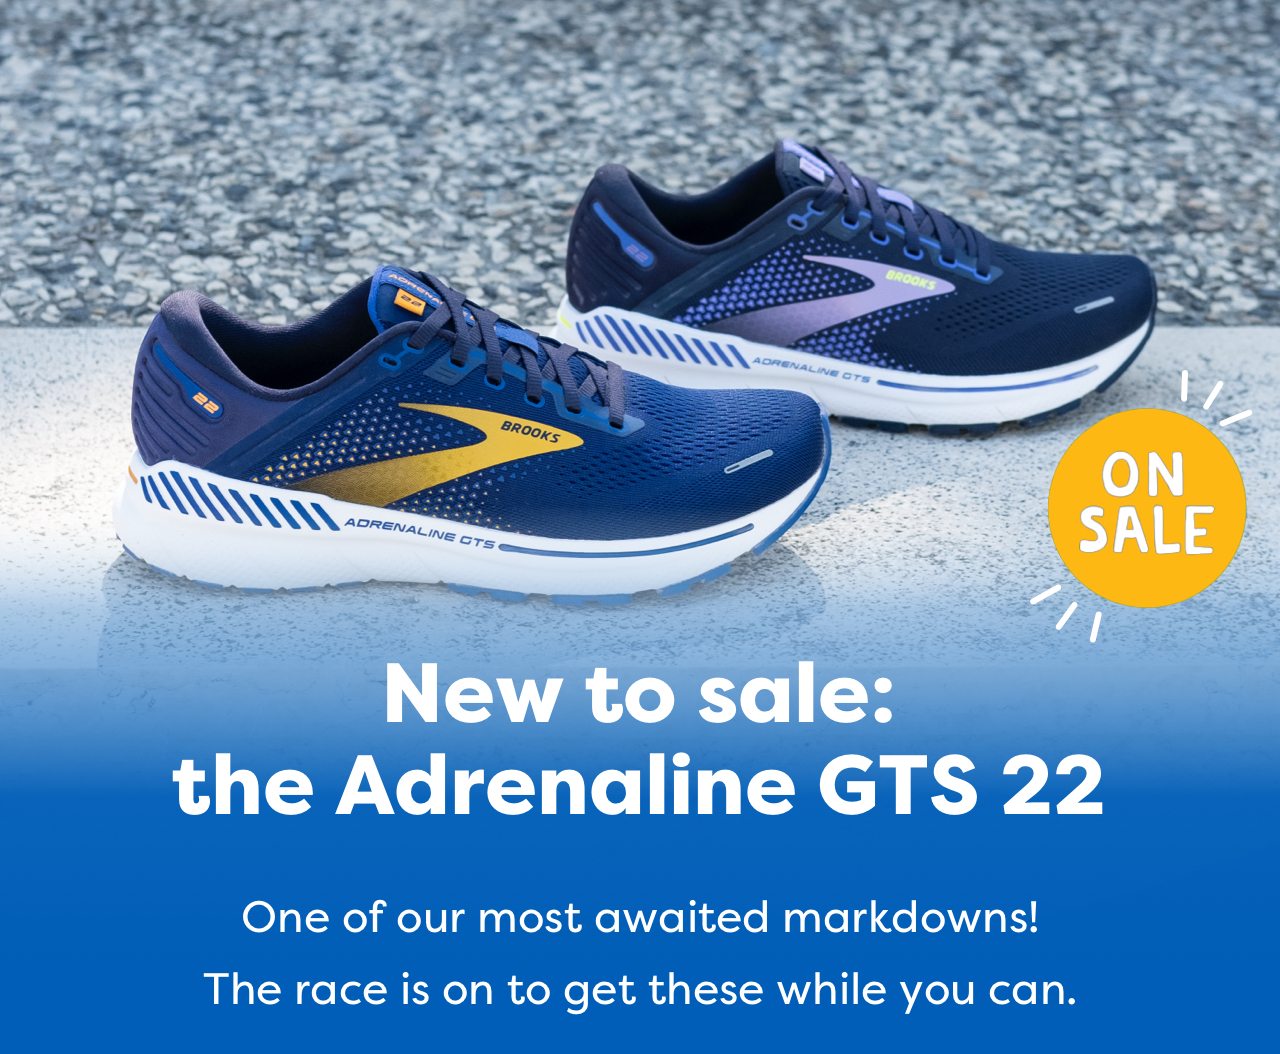 ON SALE - New to sale: the Adreanline GTS 22 - One of our most awaited markdowns! The race is on to ge ttehse while you can. 